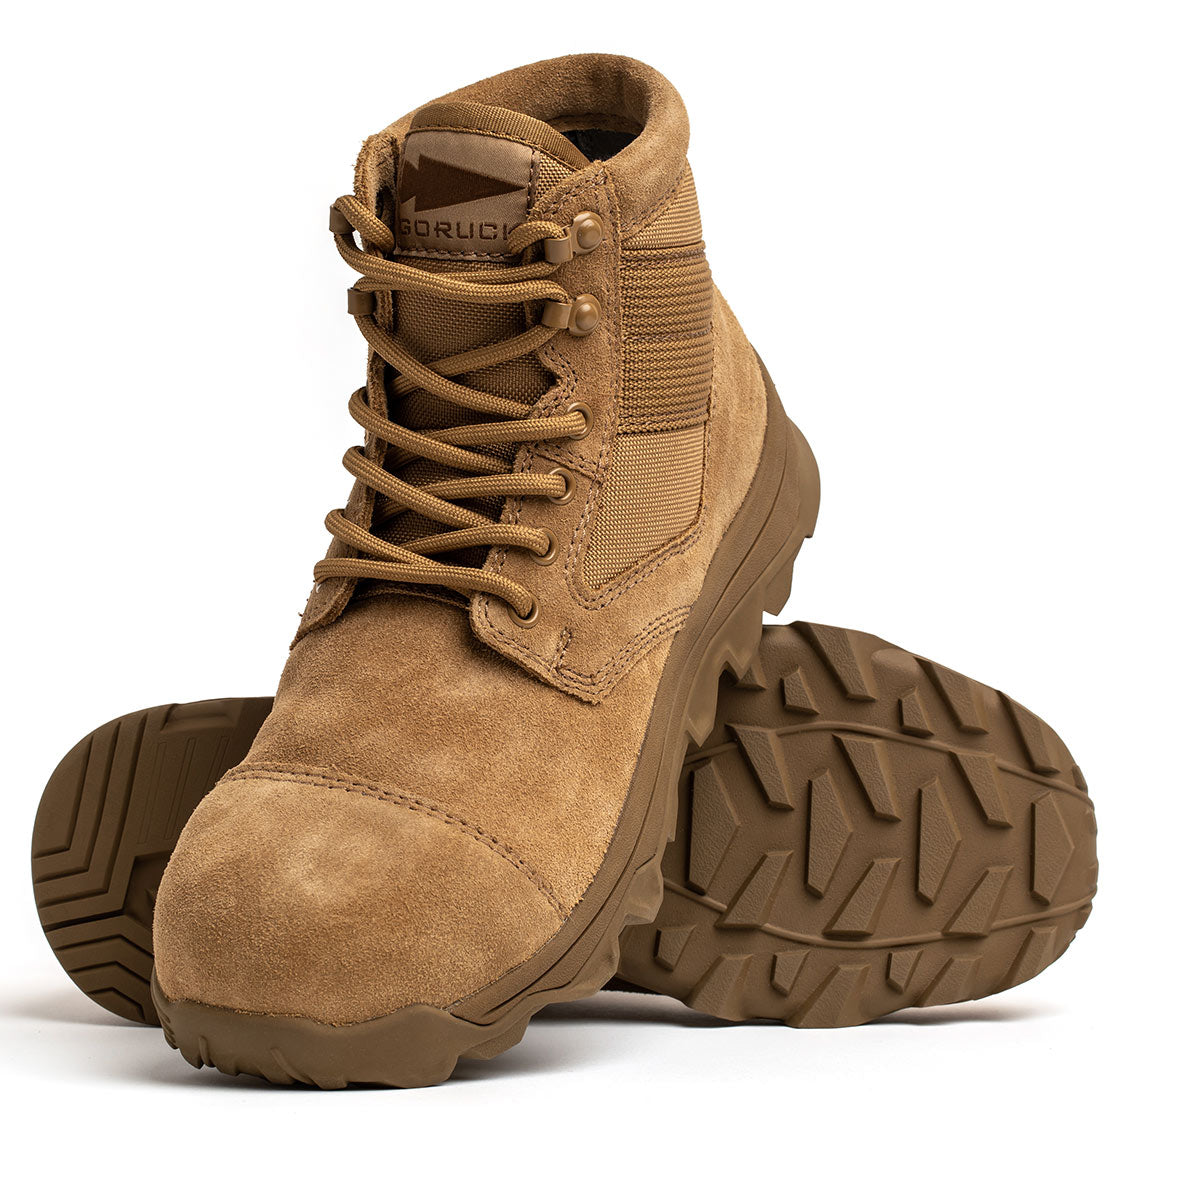 MACV-2 Safety Boot - Mid Top